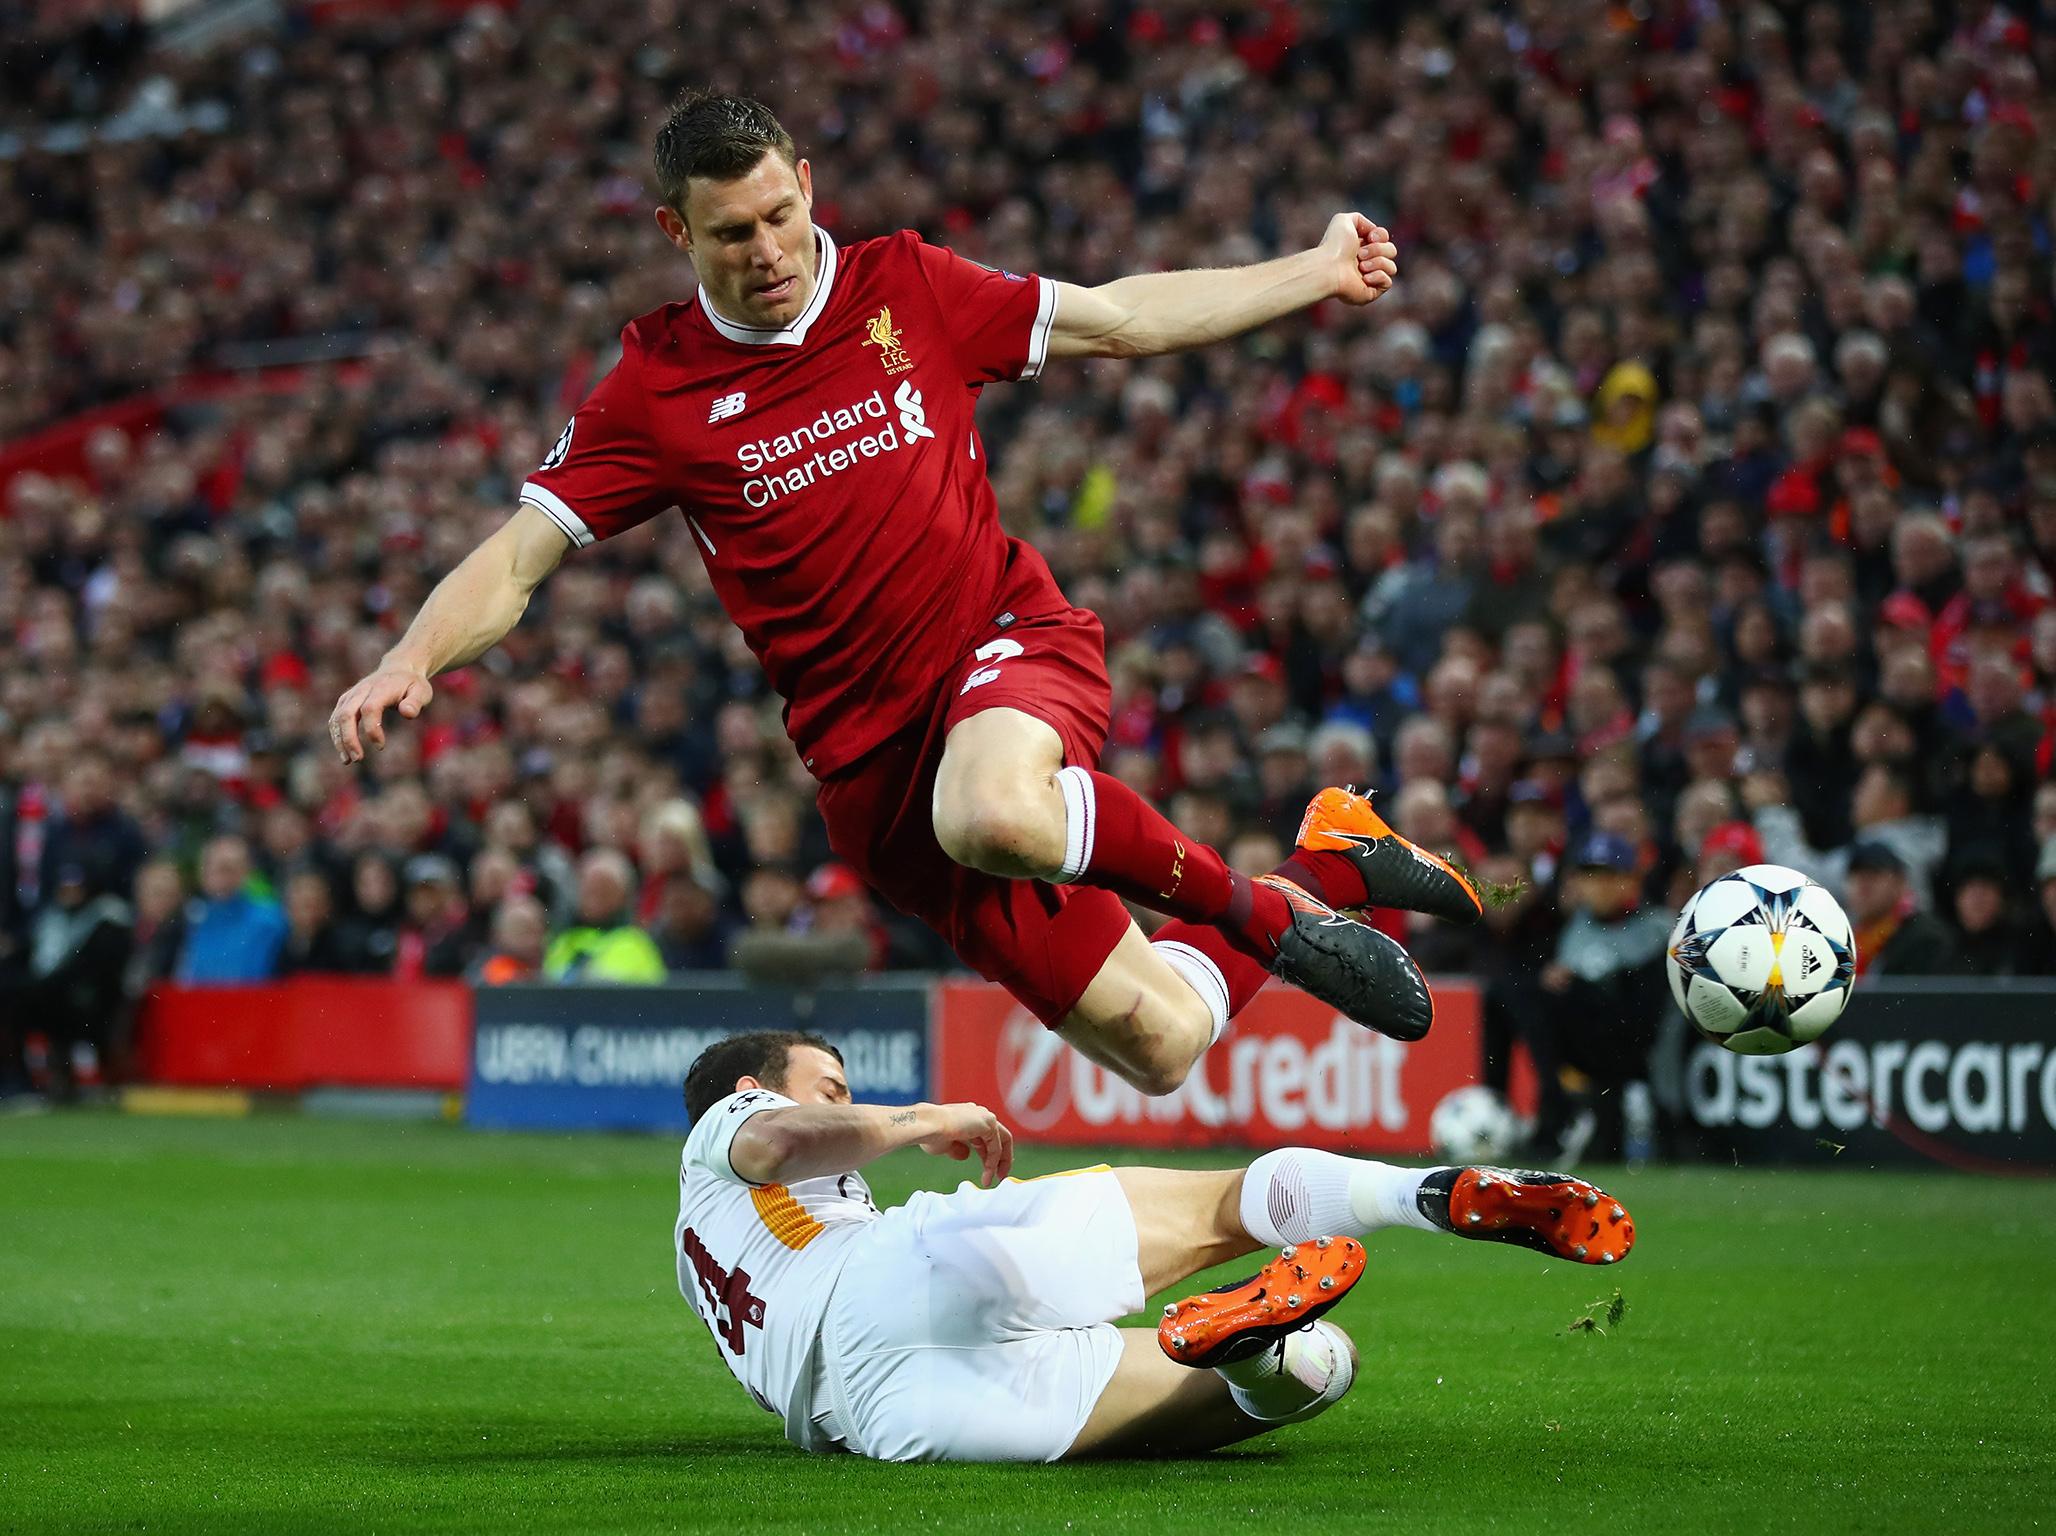 James Milner has been influential for Liverpool this season